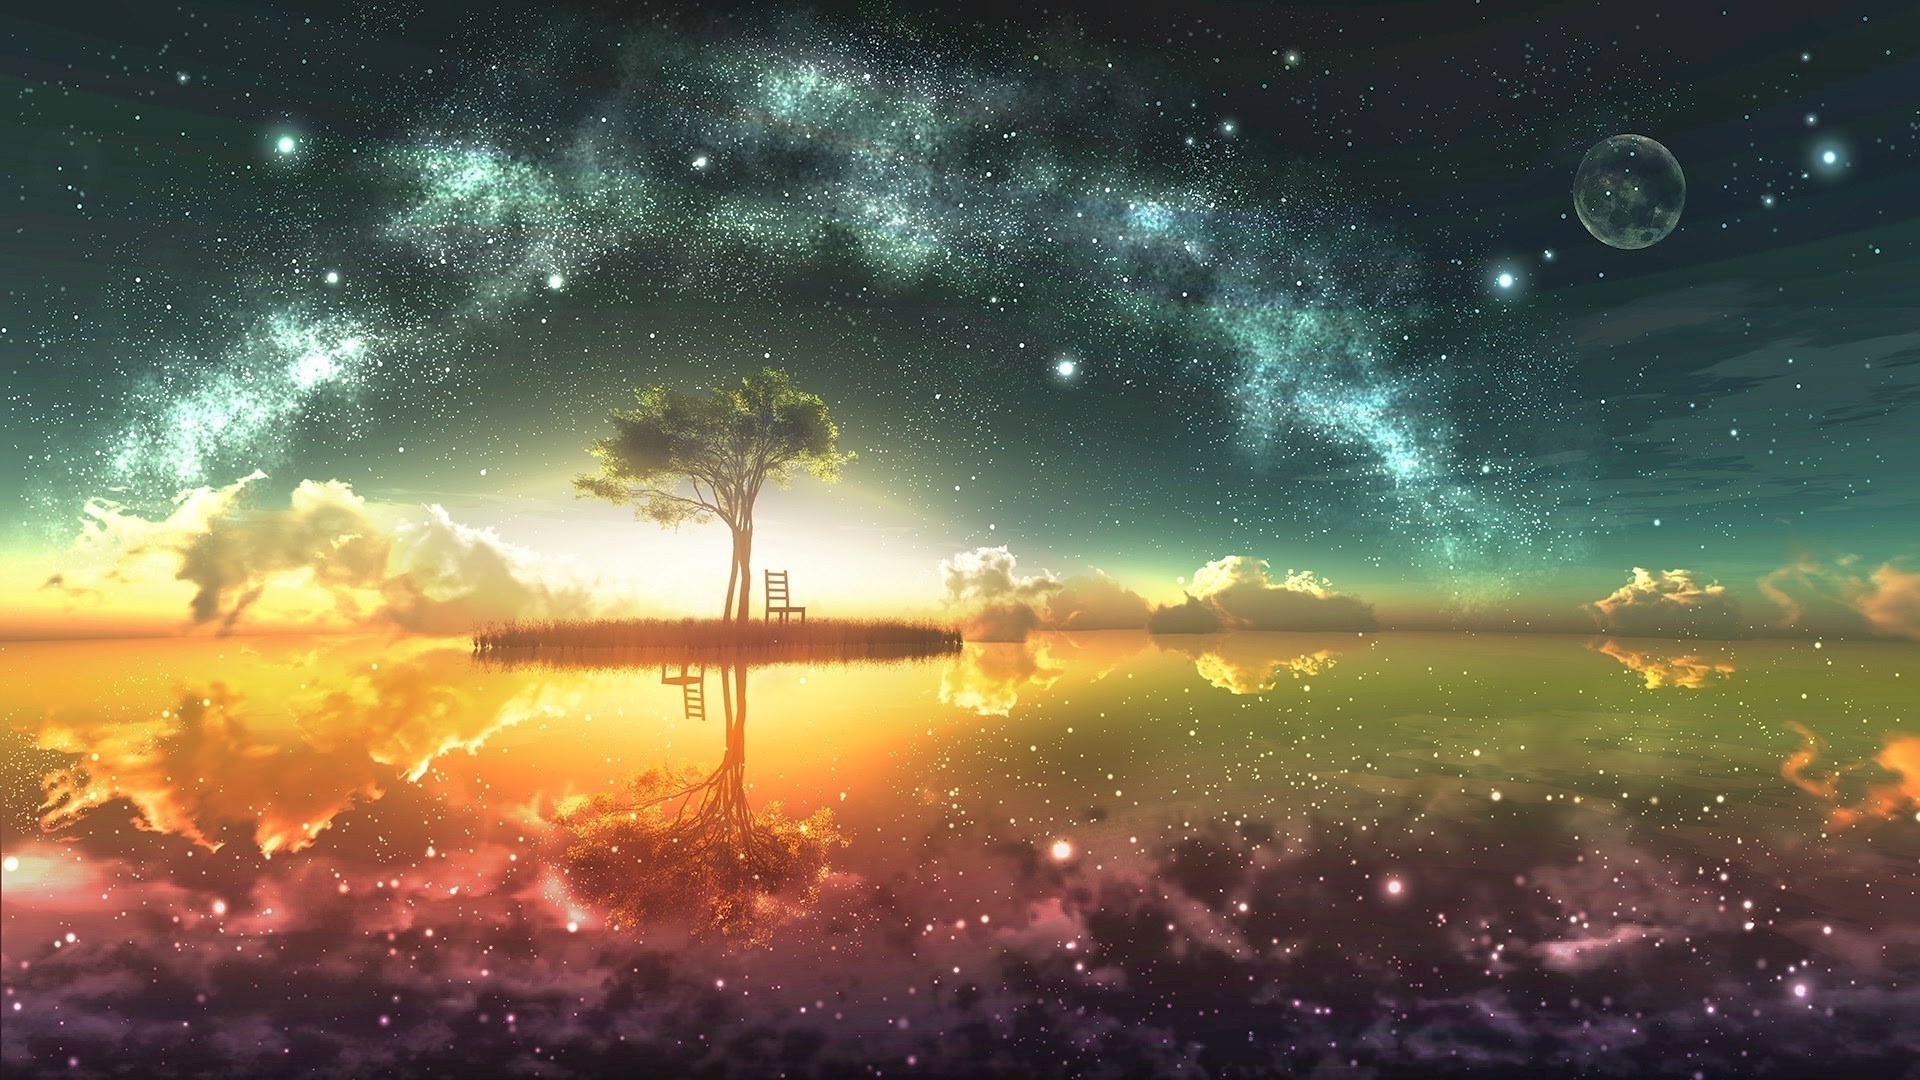 Digital Art, Fantasy Art, Trees, Space, Space Art, Stars Wallpapers HD / Desktop and Mobile Backgrounds